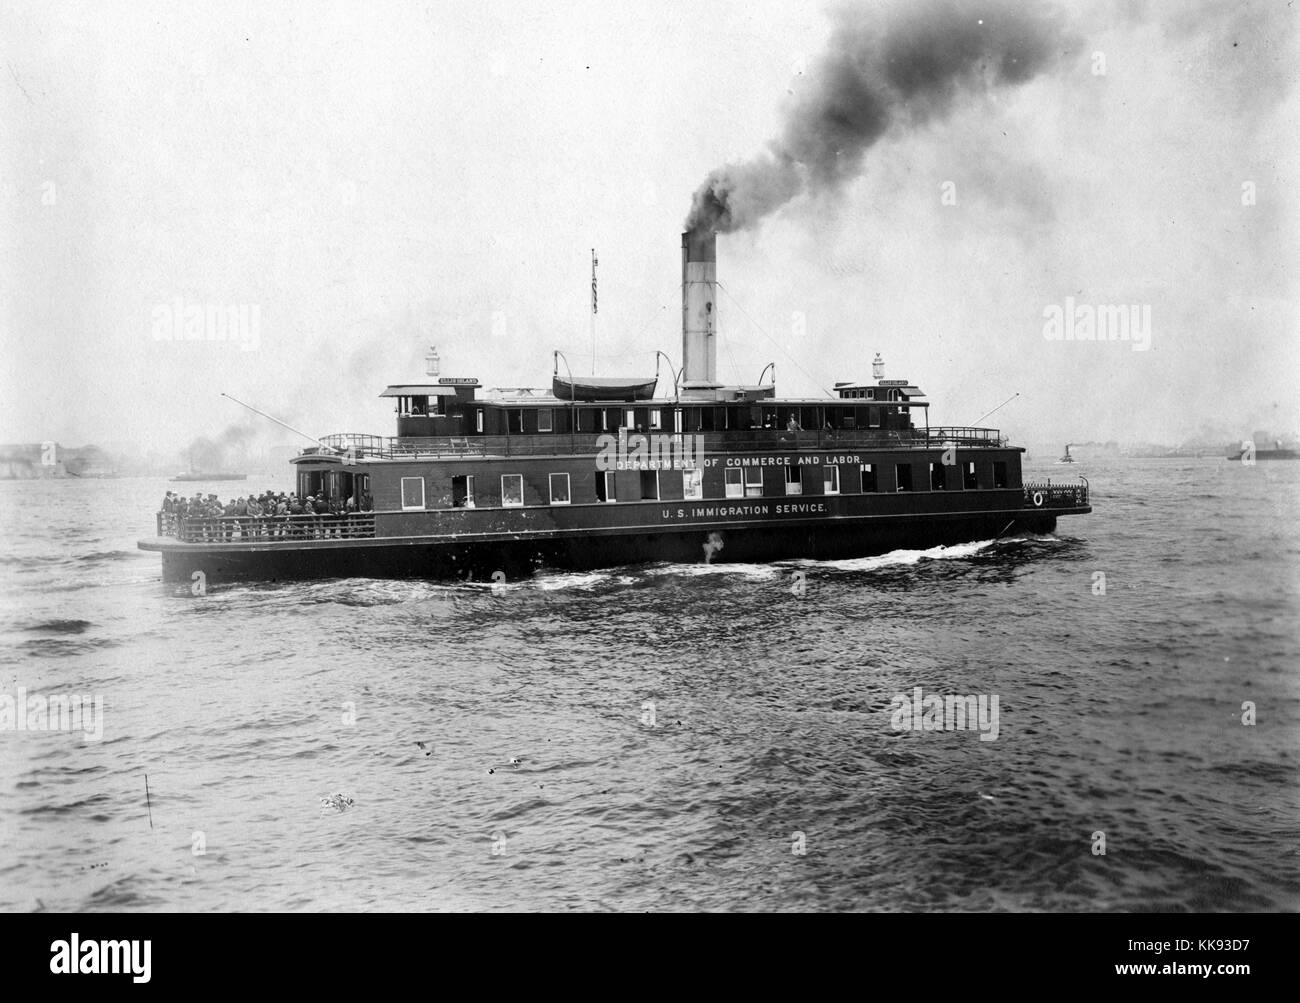 A photograph of a ship belonging to the Department of Commerce and Labor which operated the United States Immigration Service from 1903 until 1913, people can be seen standing in a large group at one end of the boat, the ferry provided transport to and from Ellis Island, over 12 million immigrants to the United States were processed on Ellis Island between 1892 and 1954, New York, 1907. From the New York Public Library. Stock Photo